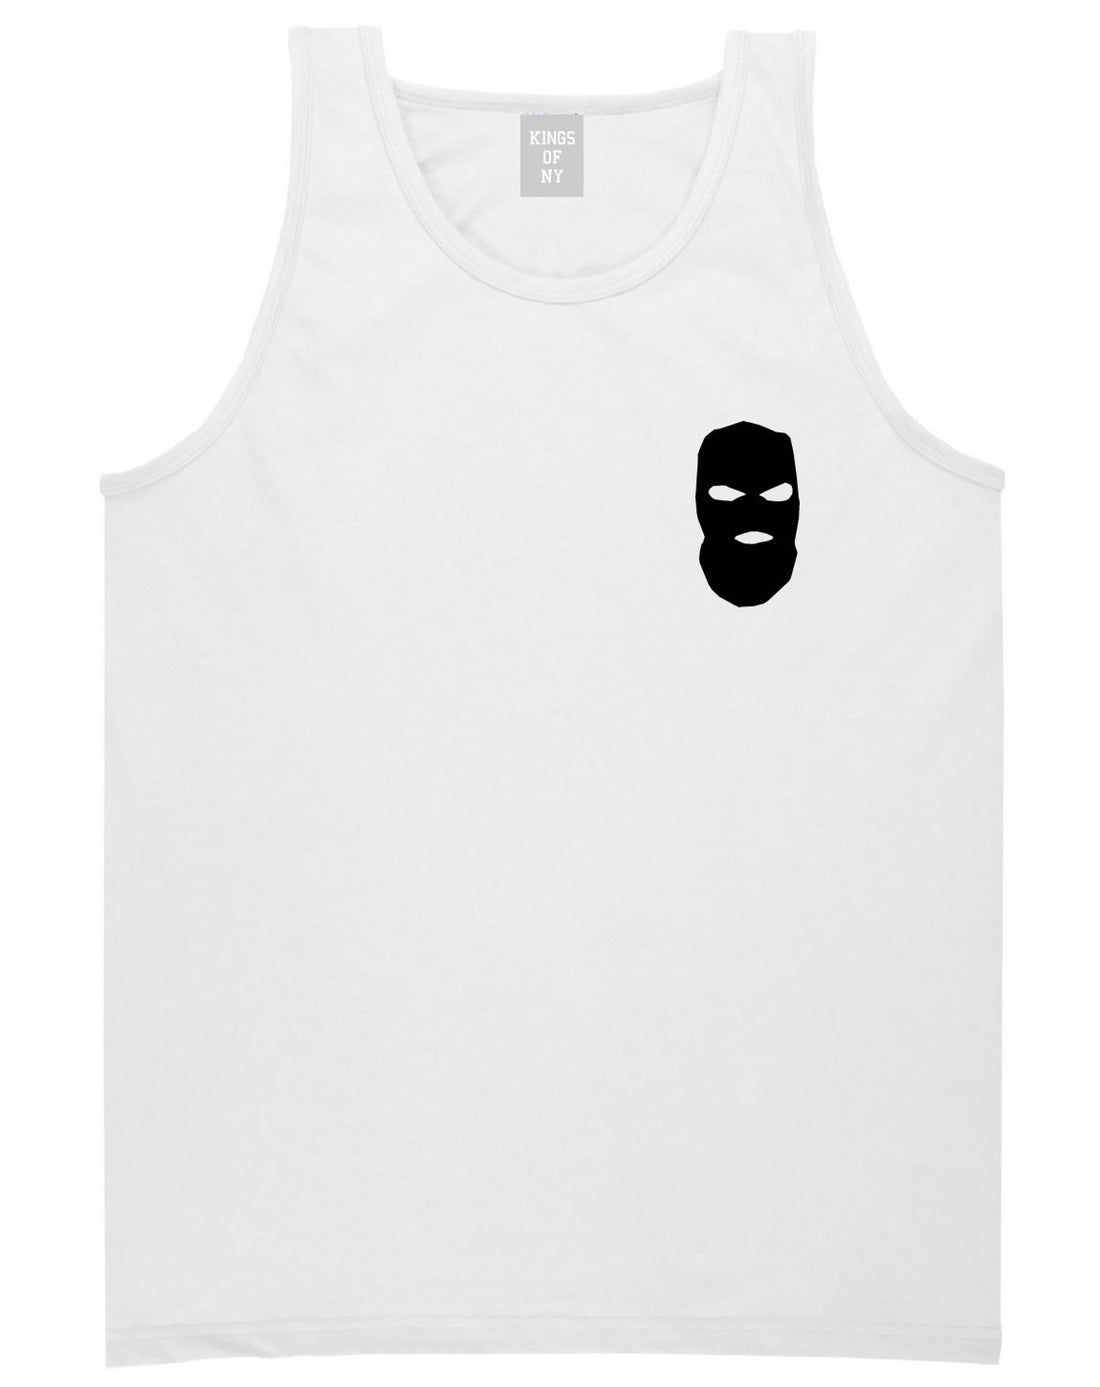 Ski Mask Way Robber Chest Logo Tank Top in White By Kings Of NY